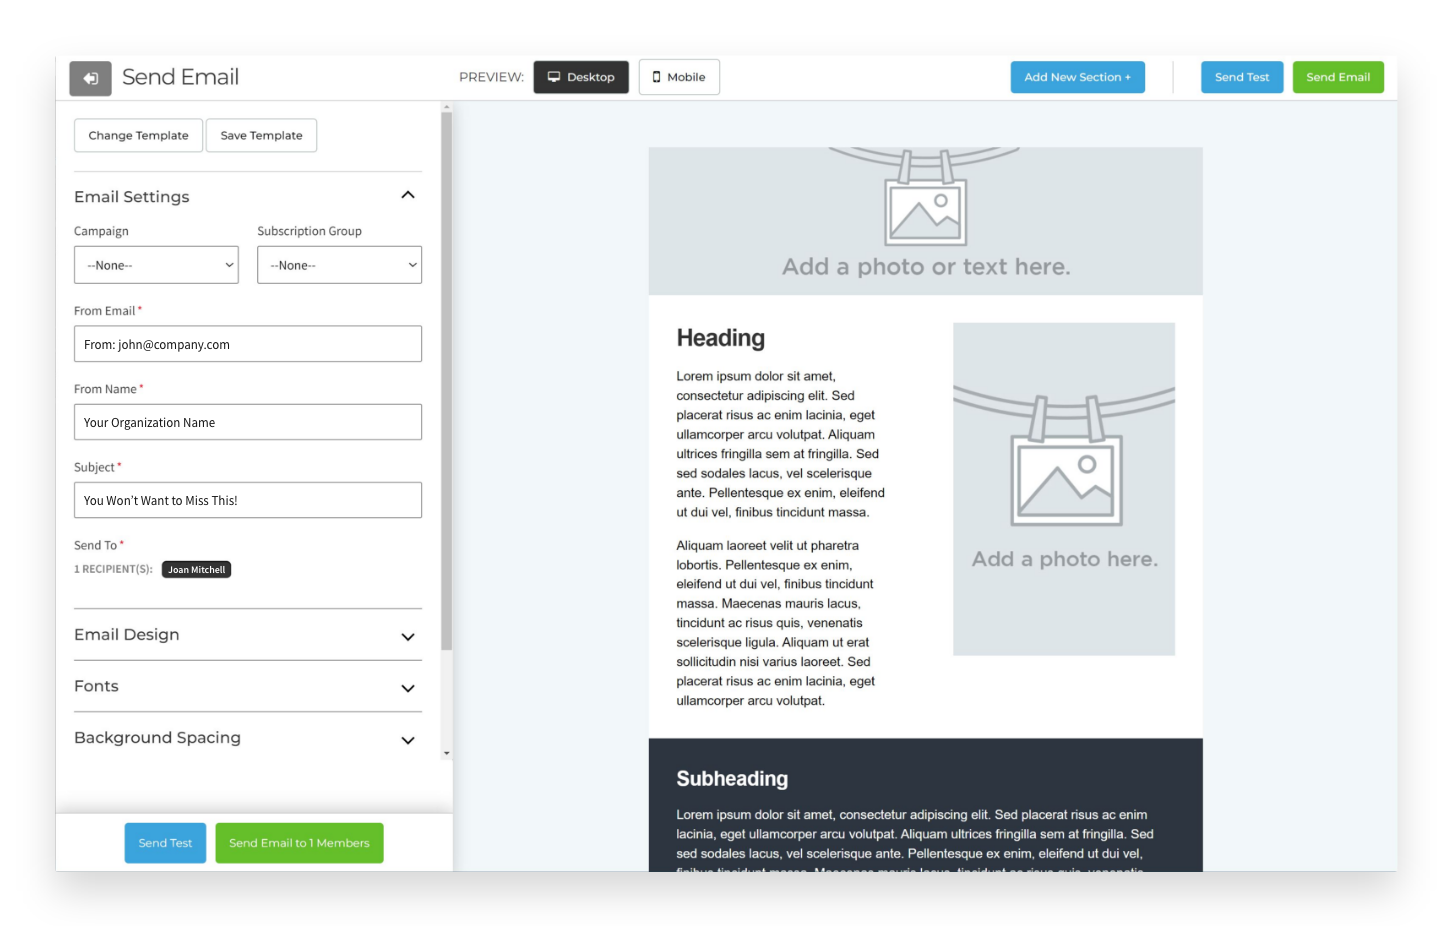 new Marketing+ Email Builder interface